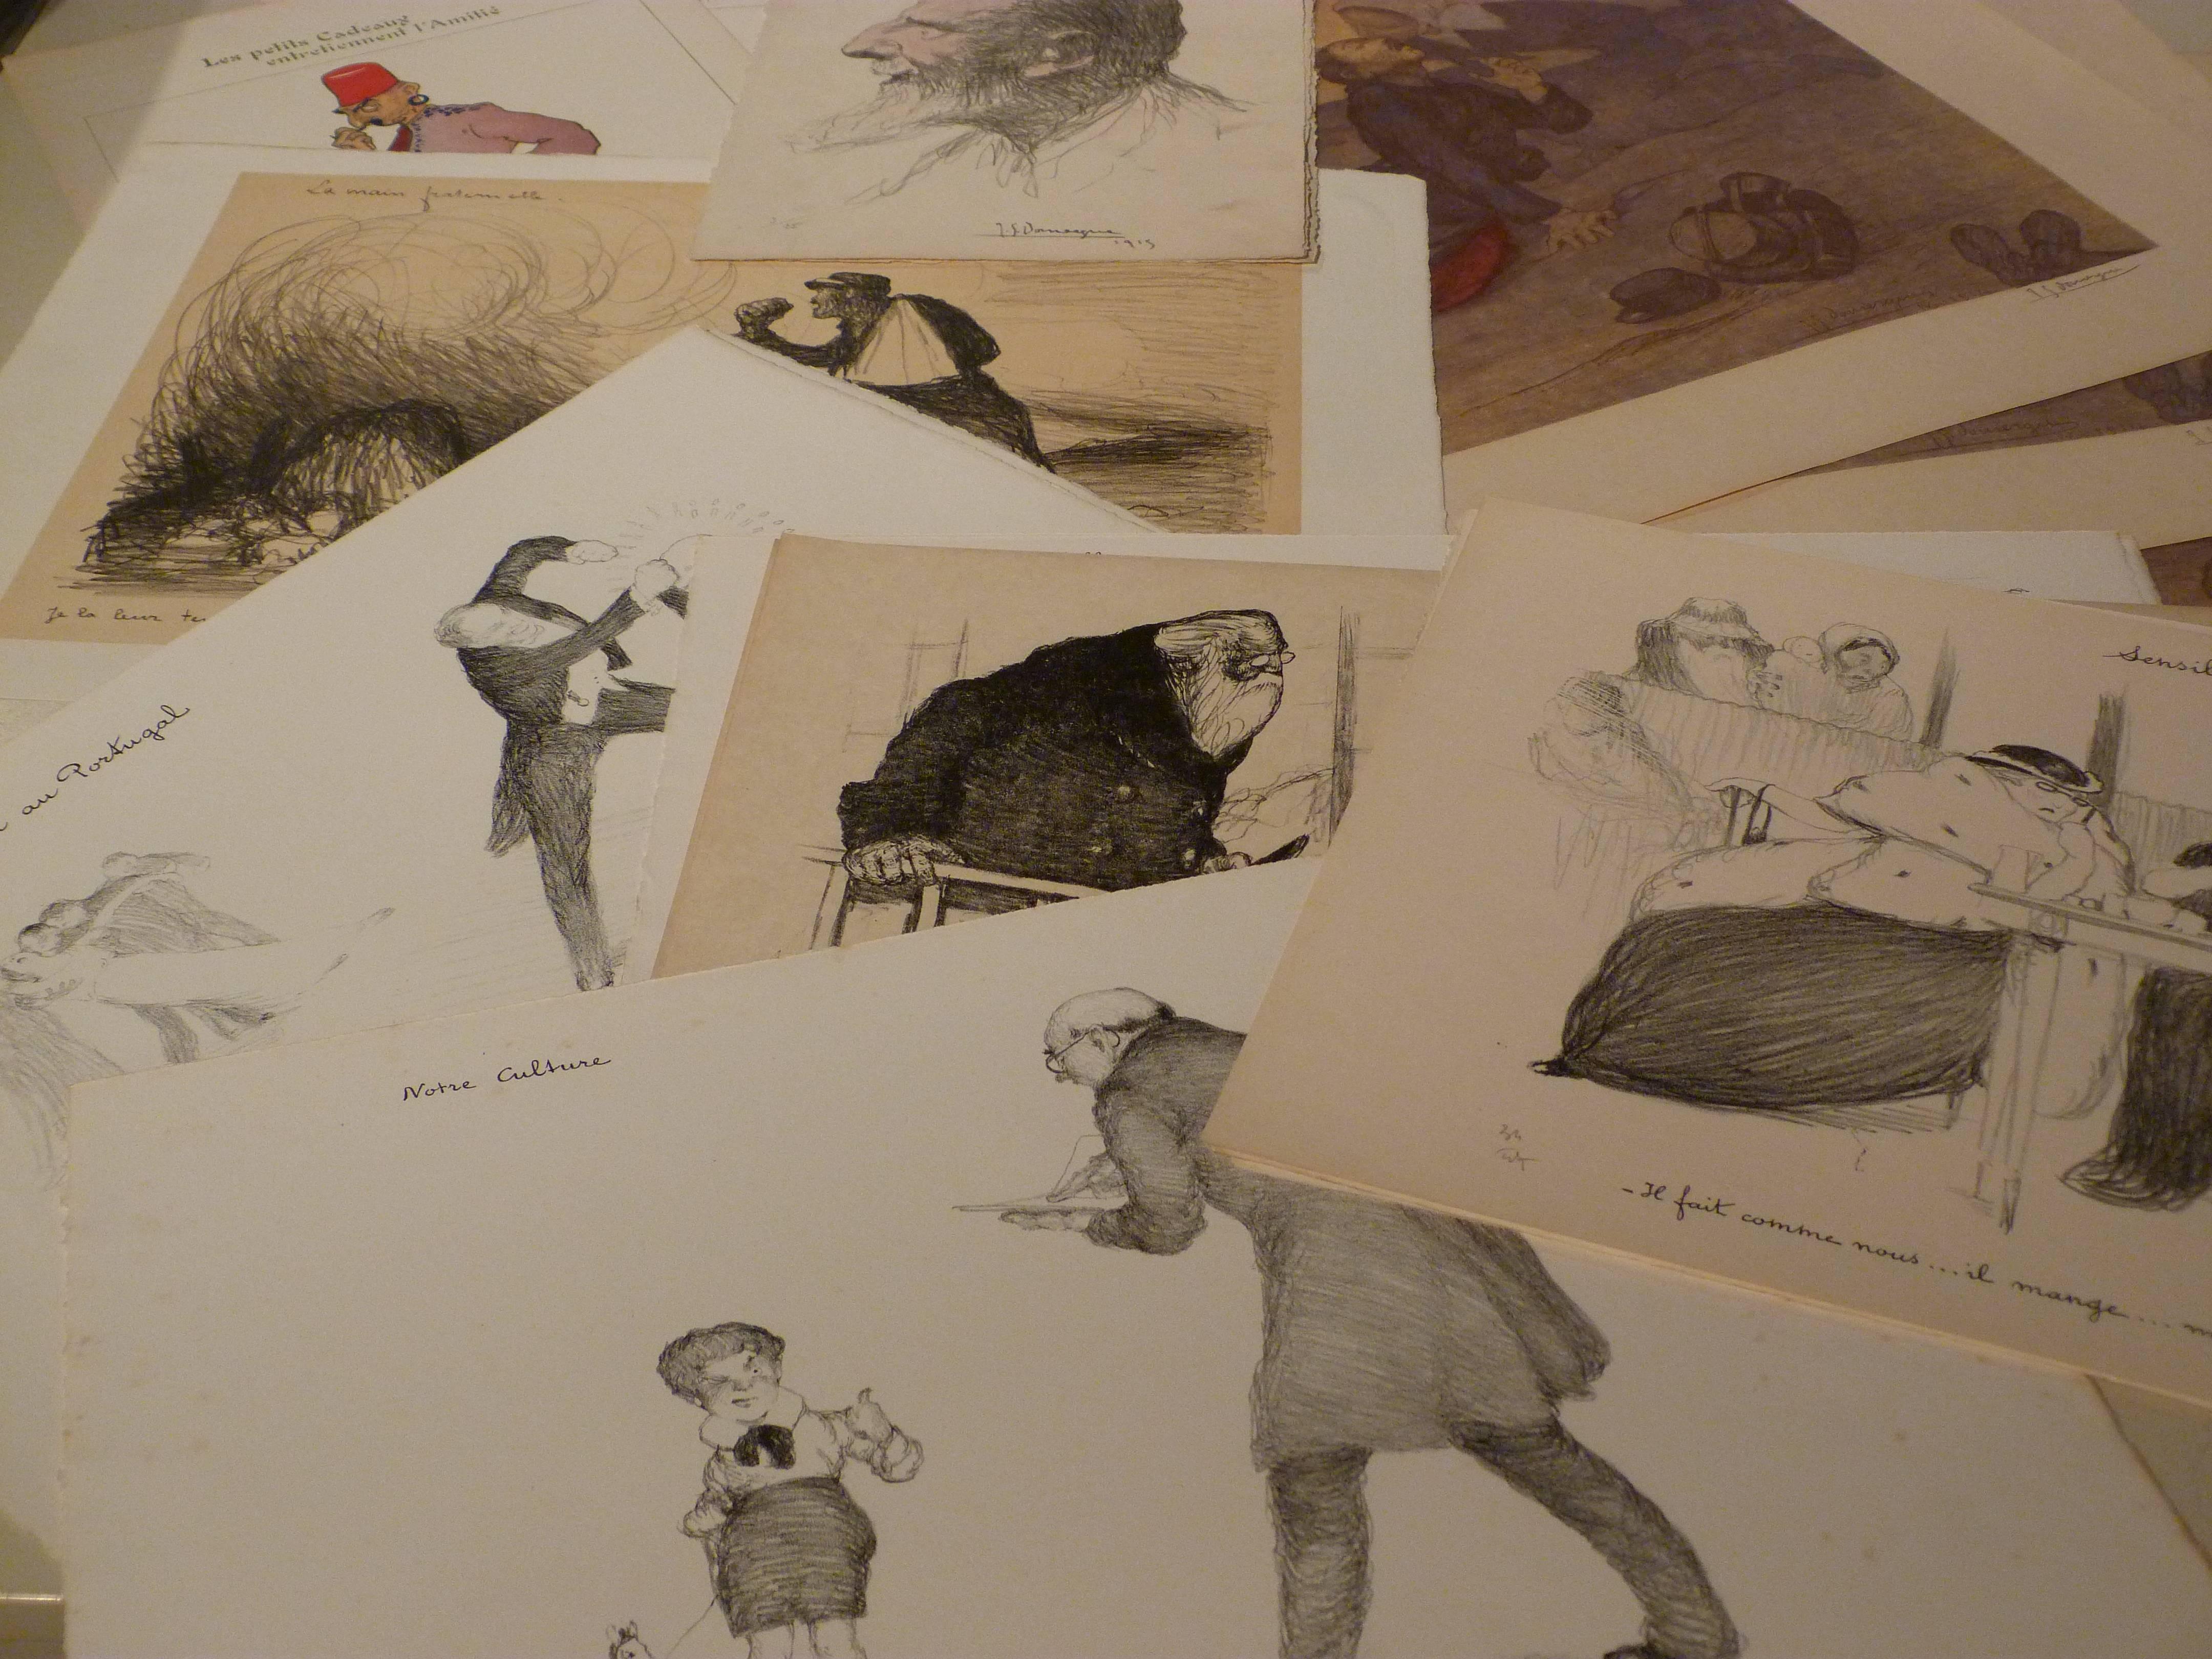 A collection of 500 originals WW1 artworks by various artists - Impressionist Print by Théophile Alexandre Steinlen